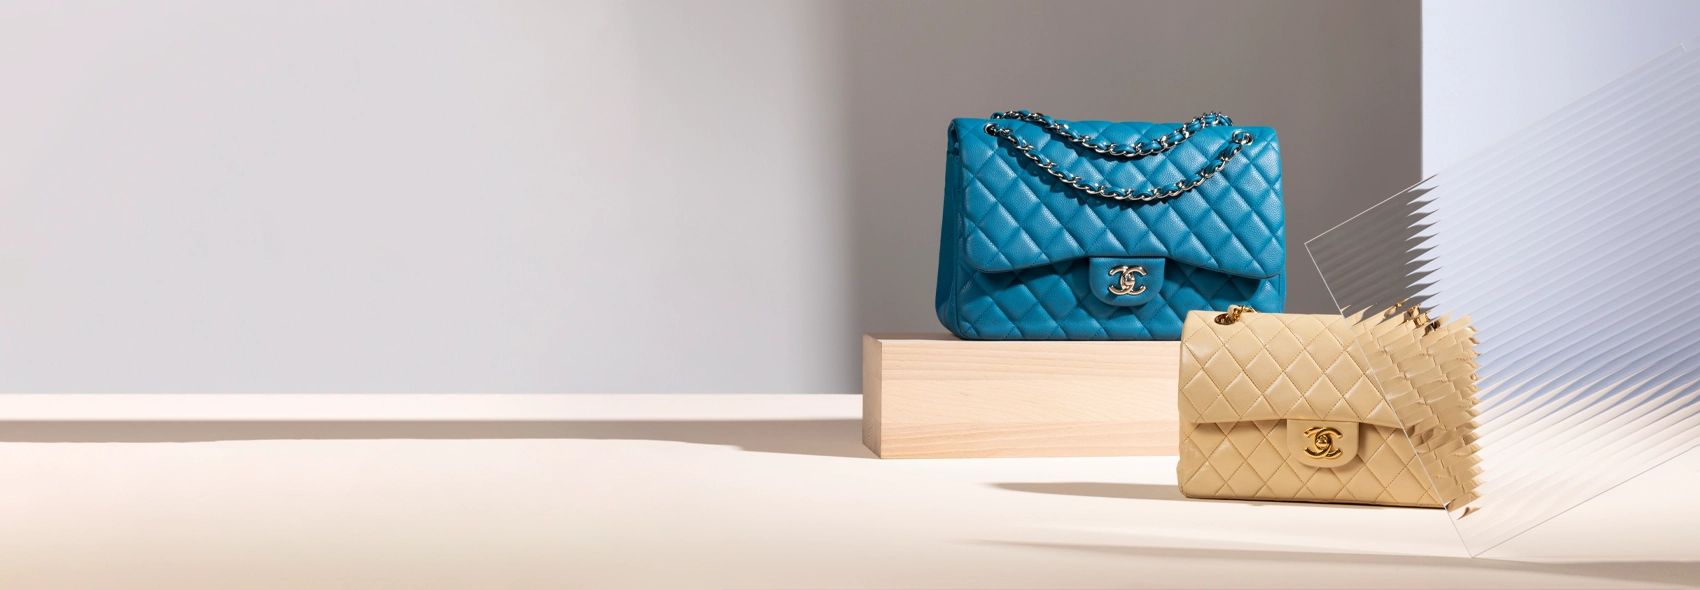 How to Take Care of Your Chanel Bag